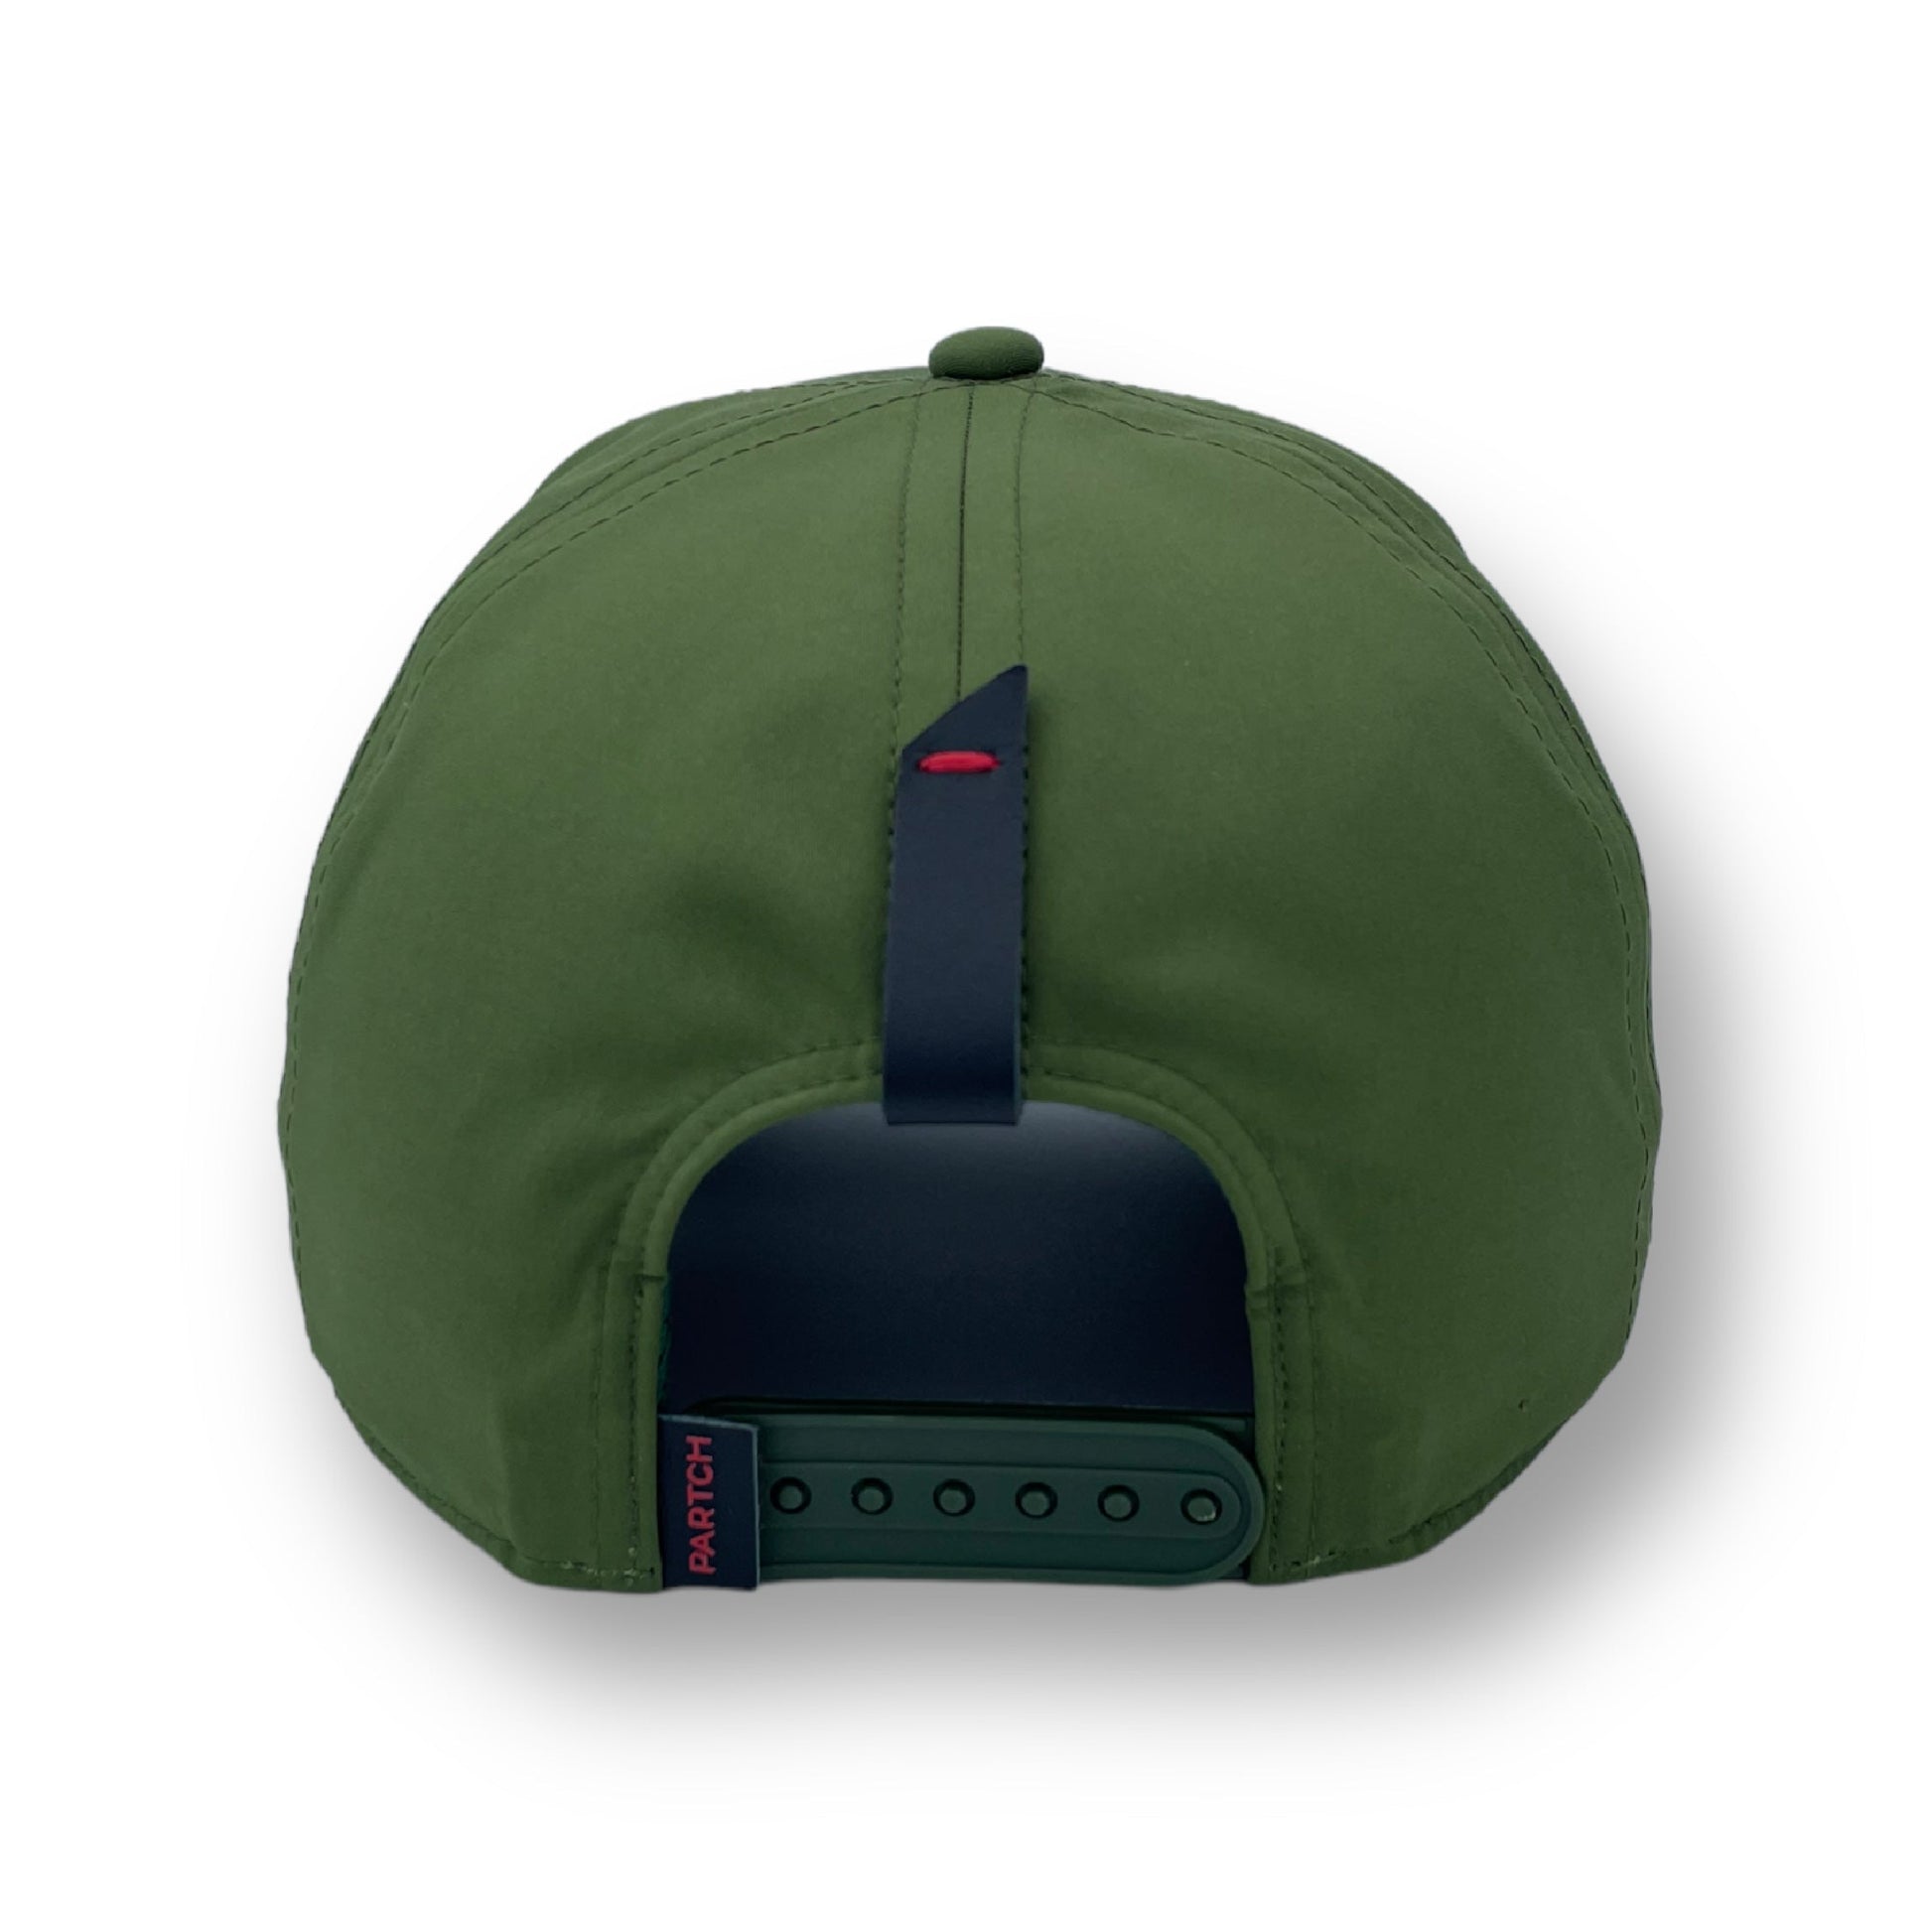 PARTCH full fabric trucker hat in green kaki and leather accents